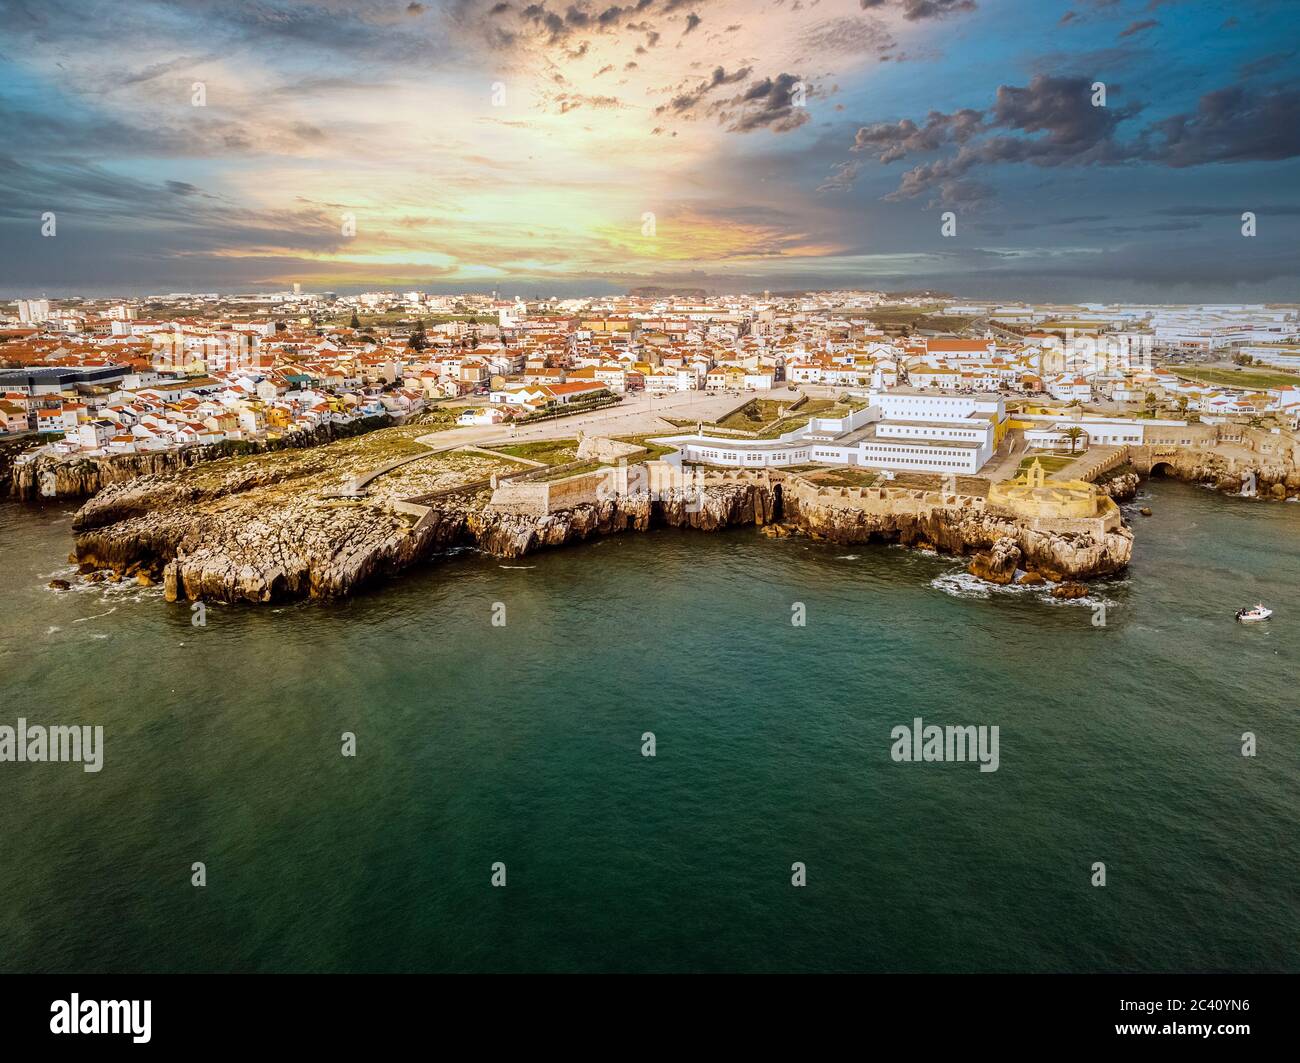 Aerial view of Peniche with the fortress - all at peninsula with hight cliffs, Portugal Stock Photo